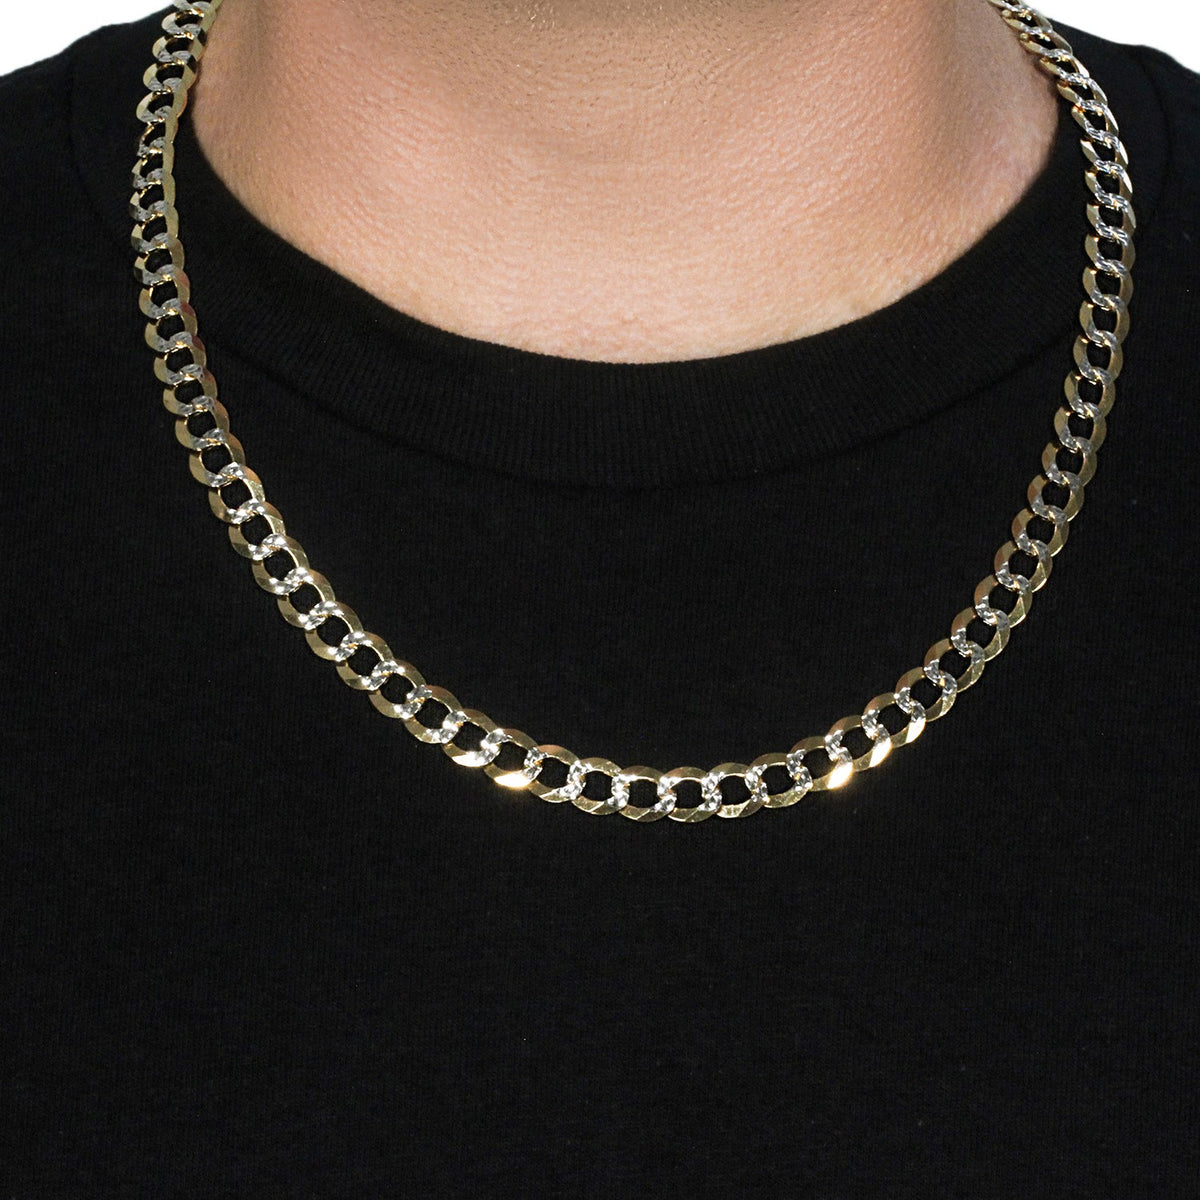 Pave Curb Chain - 14k Two Tone Gold 9.70mm